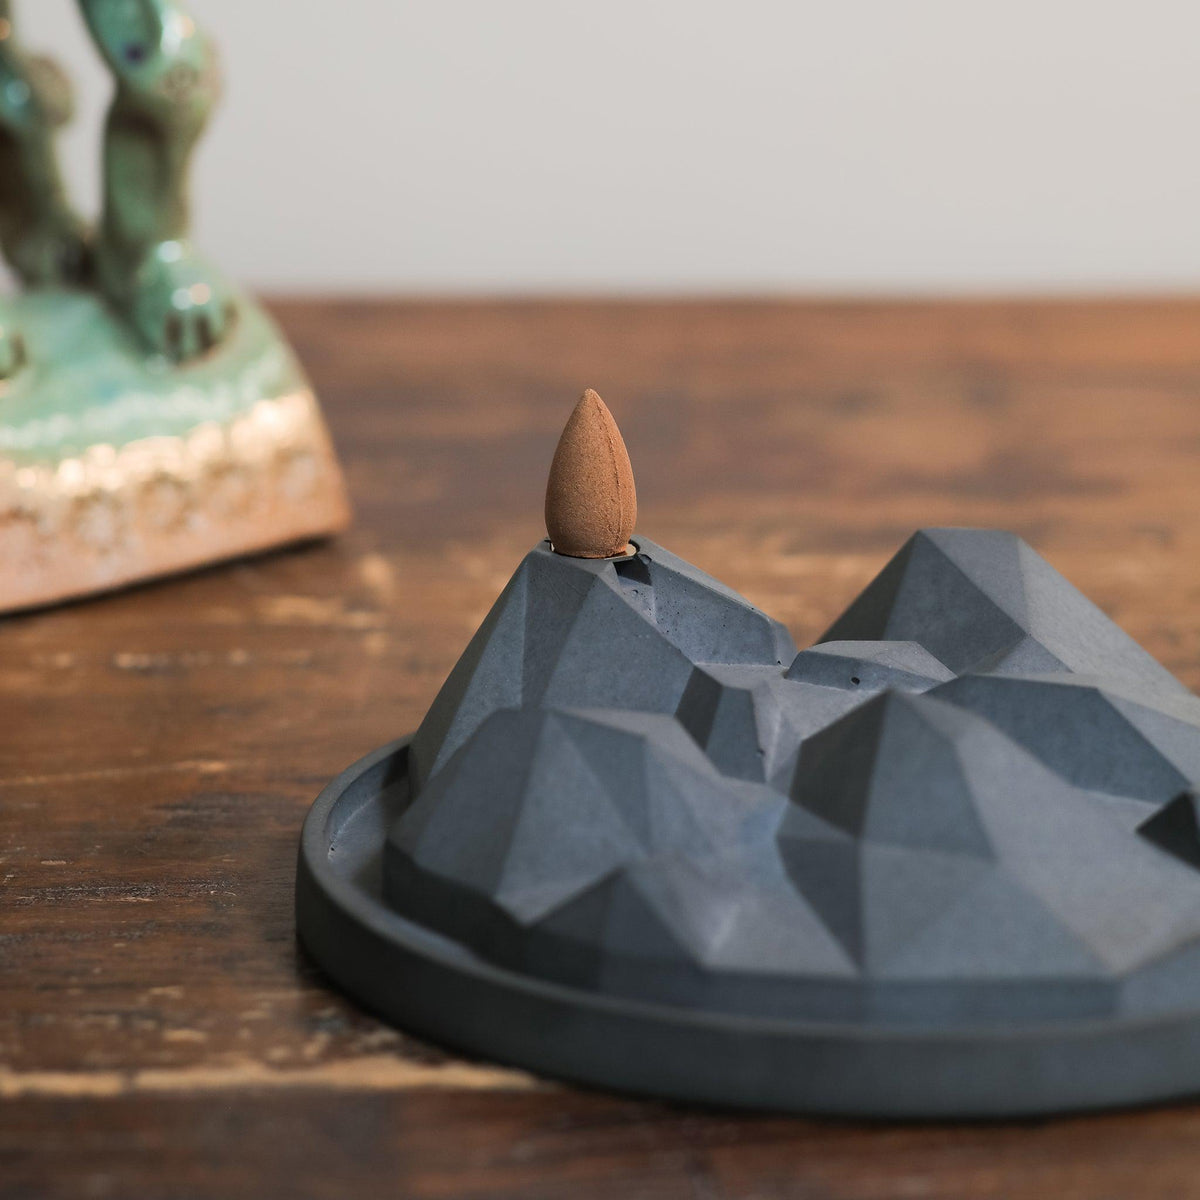 Valley of Fog Backflow Incense Burner by Kin Objects close up on table